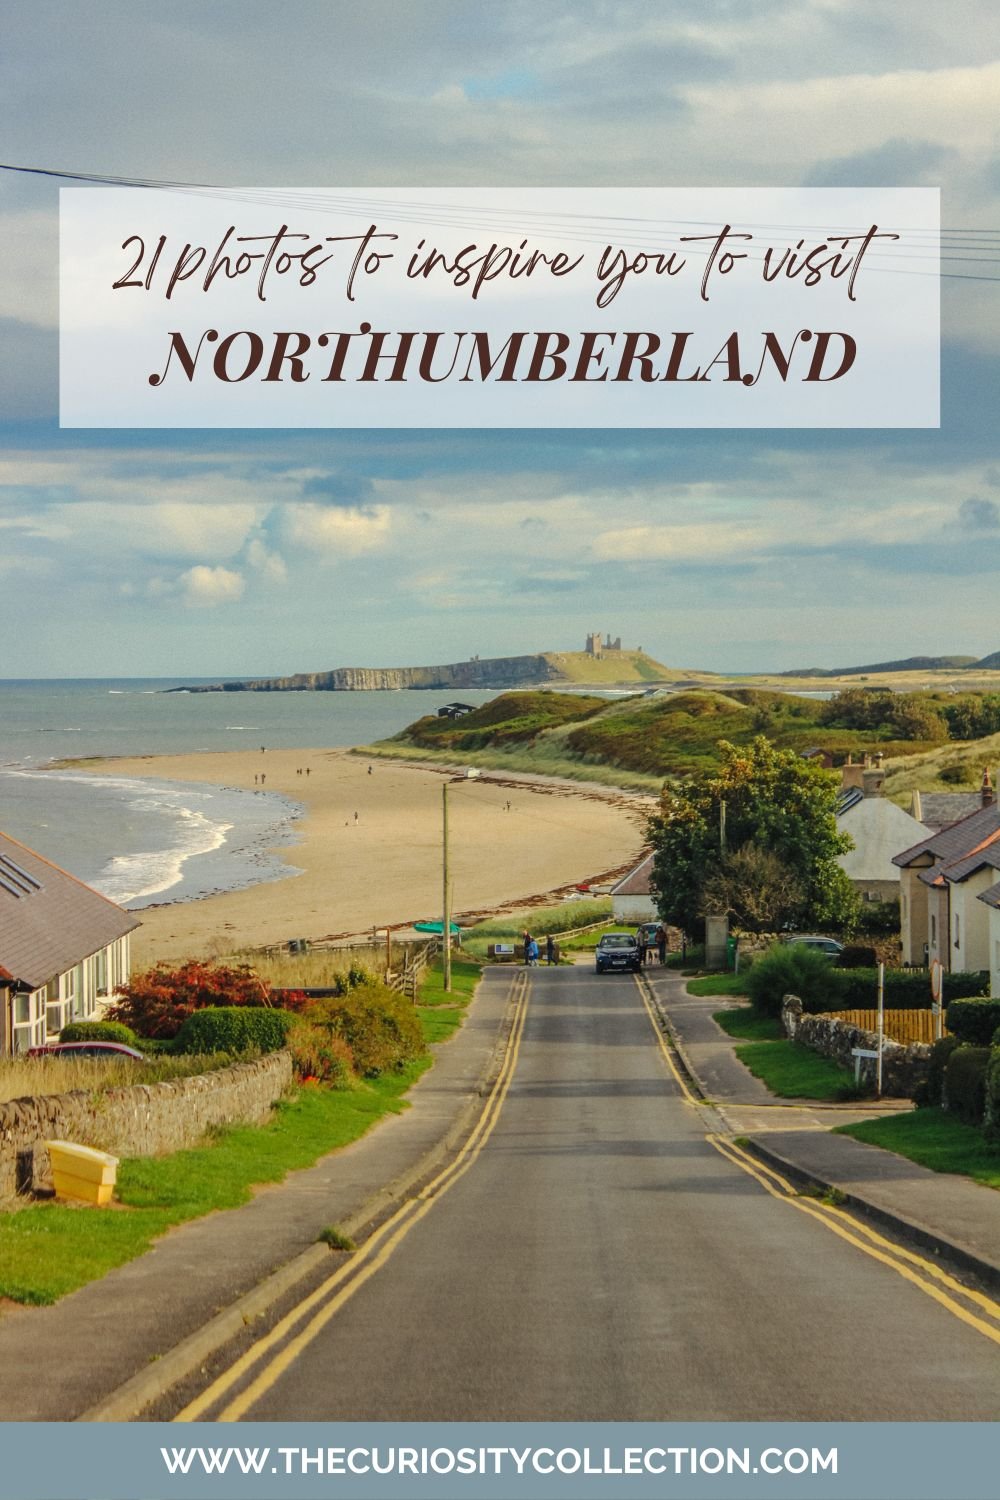 21 photos to inspire you to visit Northumberland.jpg